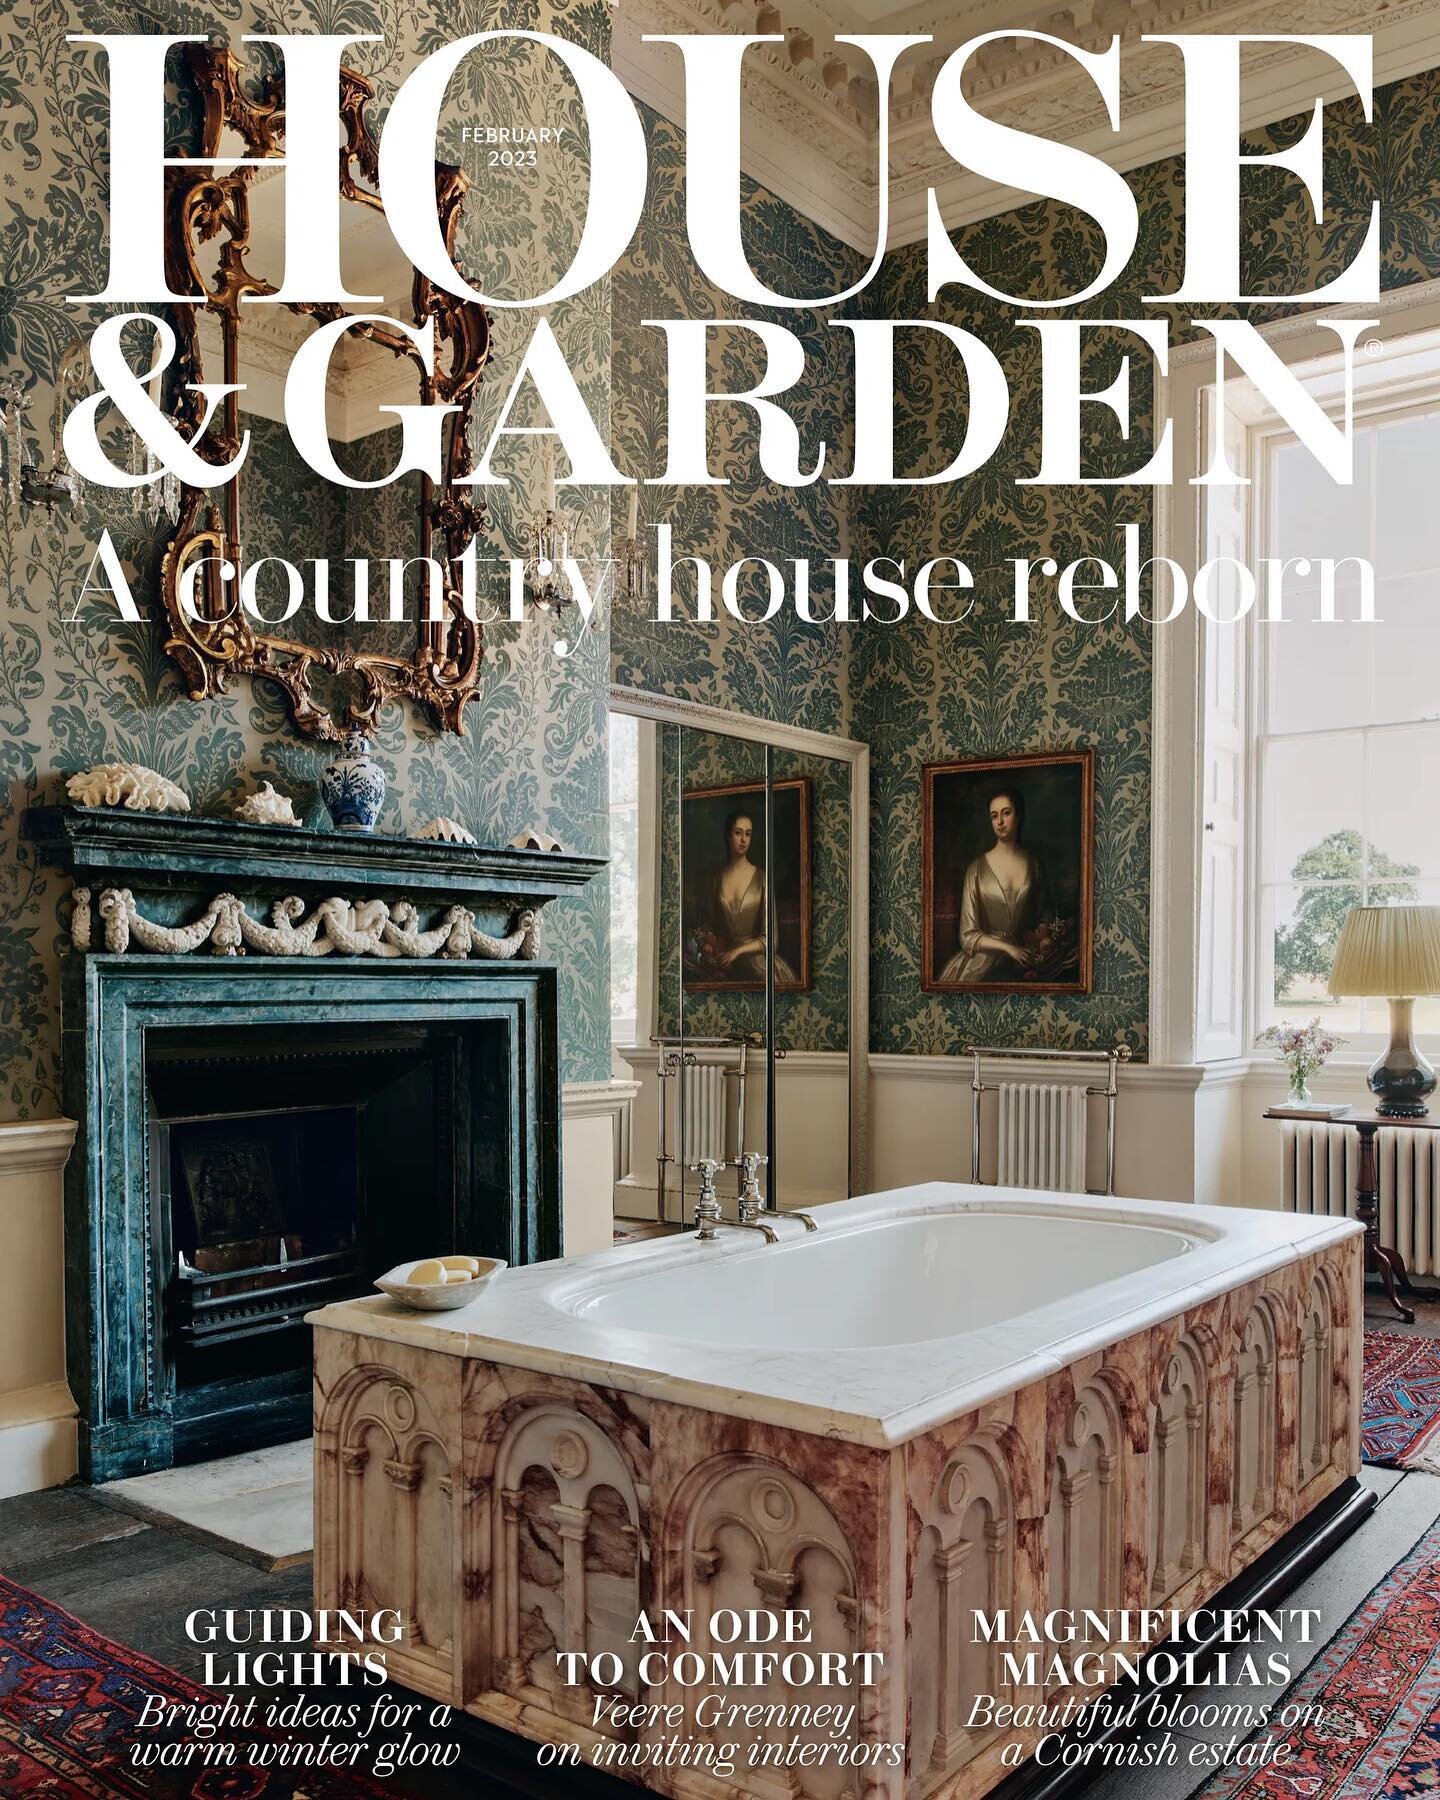 Honoured to have this month&rsquo;s cover of House &amp; Garden magazine @houseandgardenuk with the story on the amazing Wolterton Hall  @woltertonpark. It truly is a country house reborn and showcases the talents of its owners Peter Sheppard and Kei